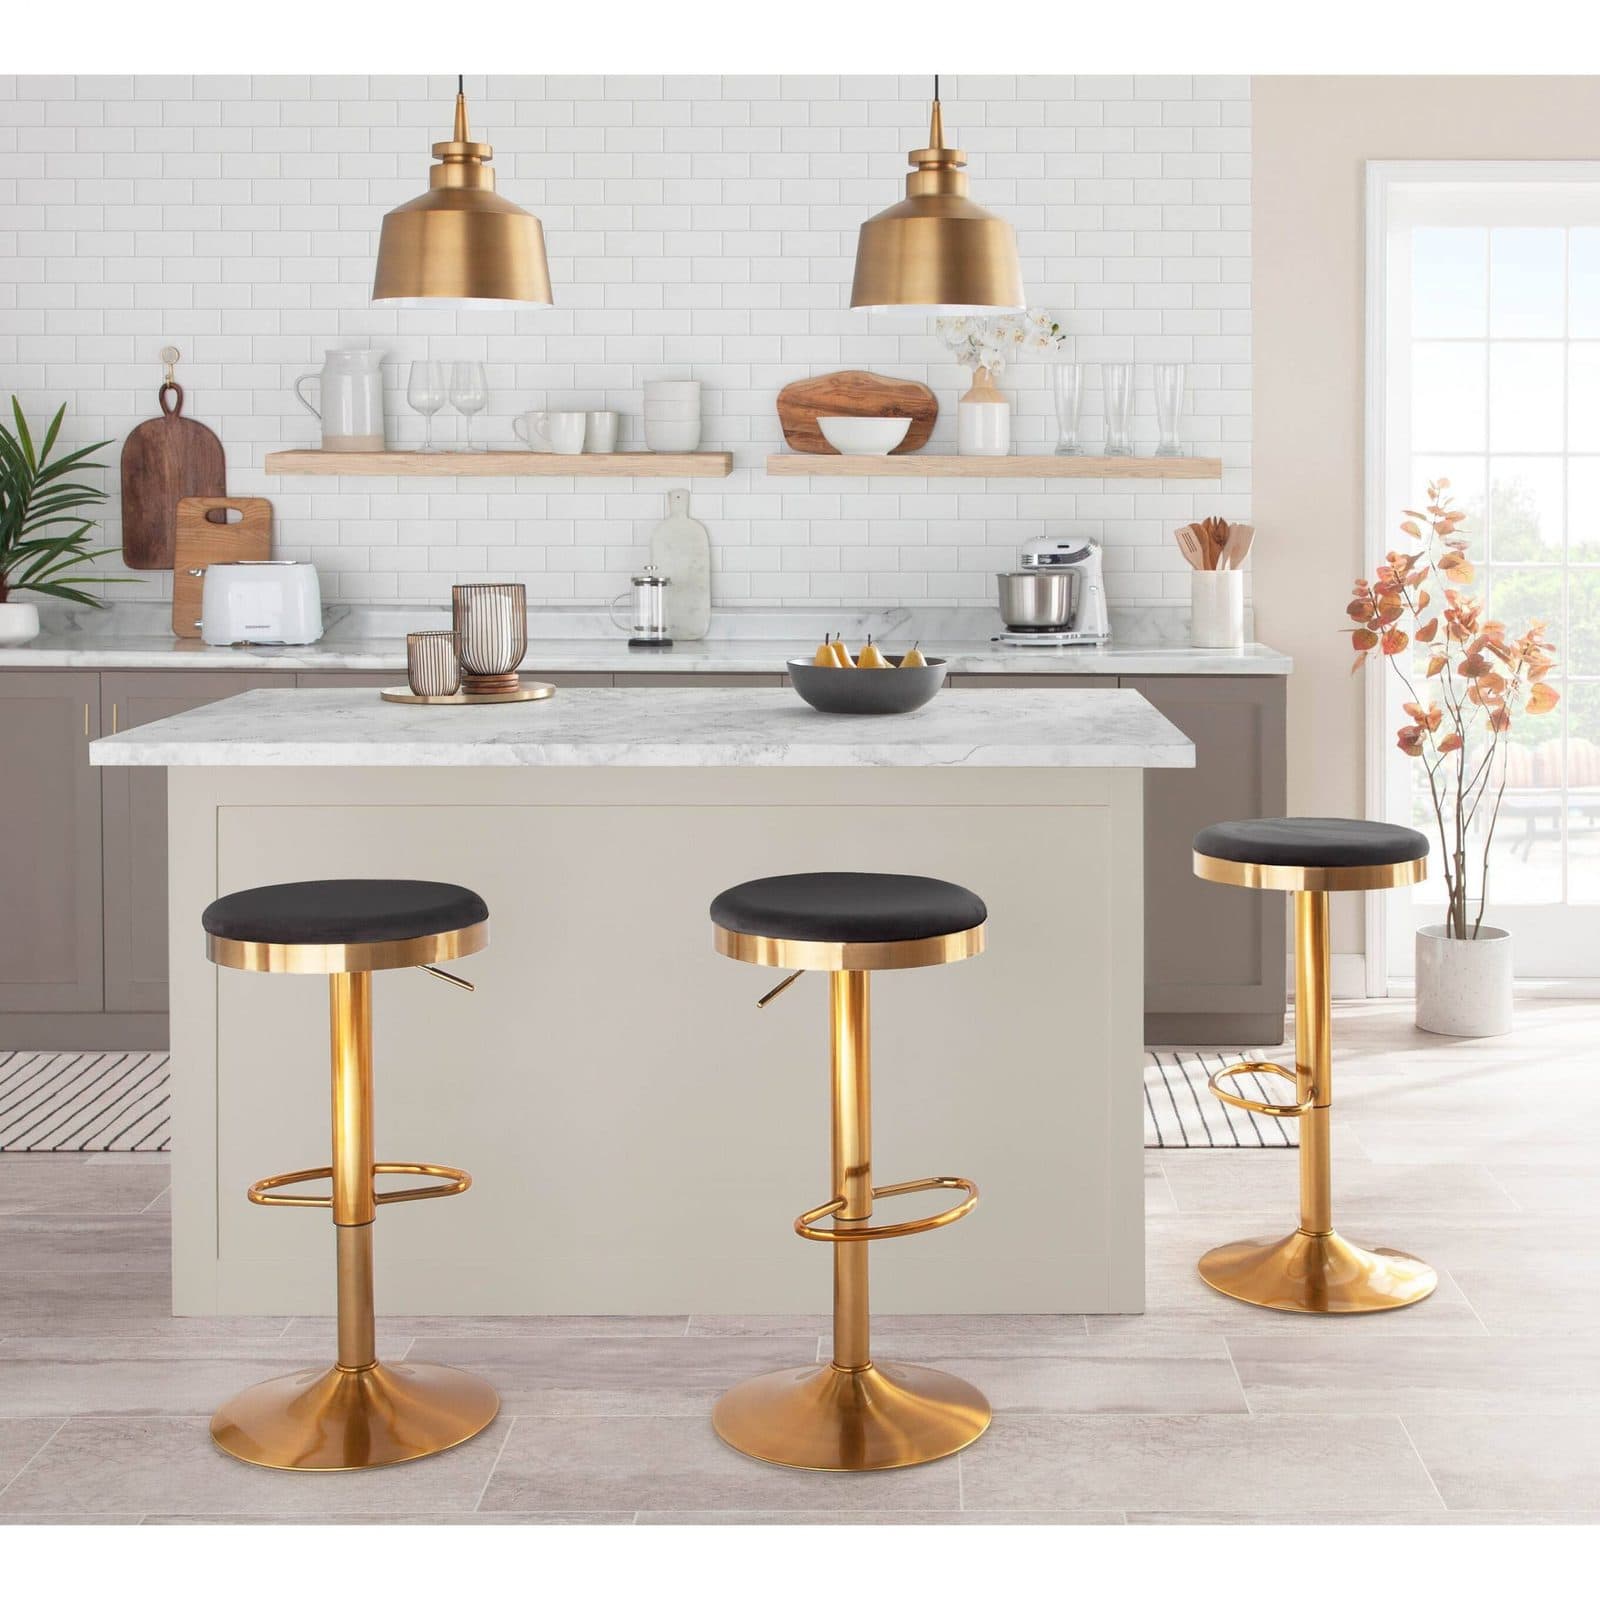 What Kind of Stool is Good for Kitchen Island